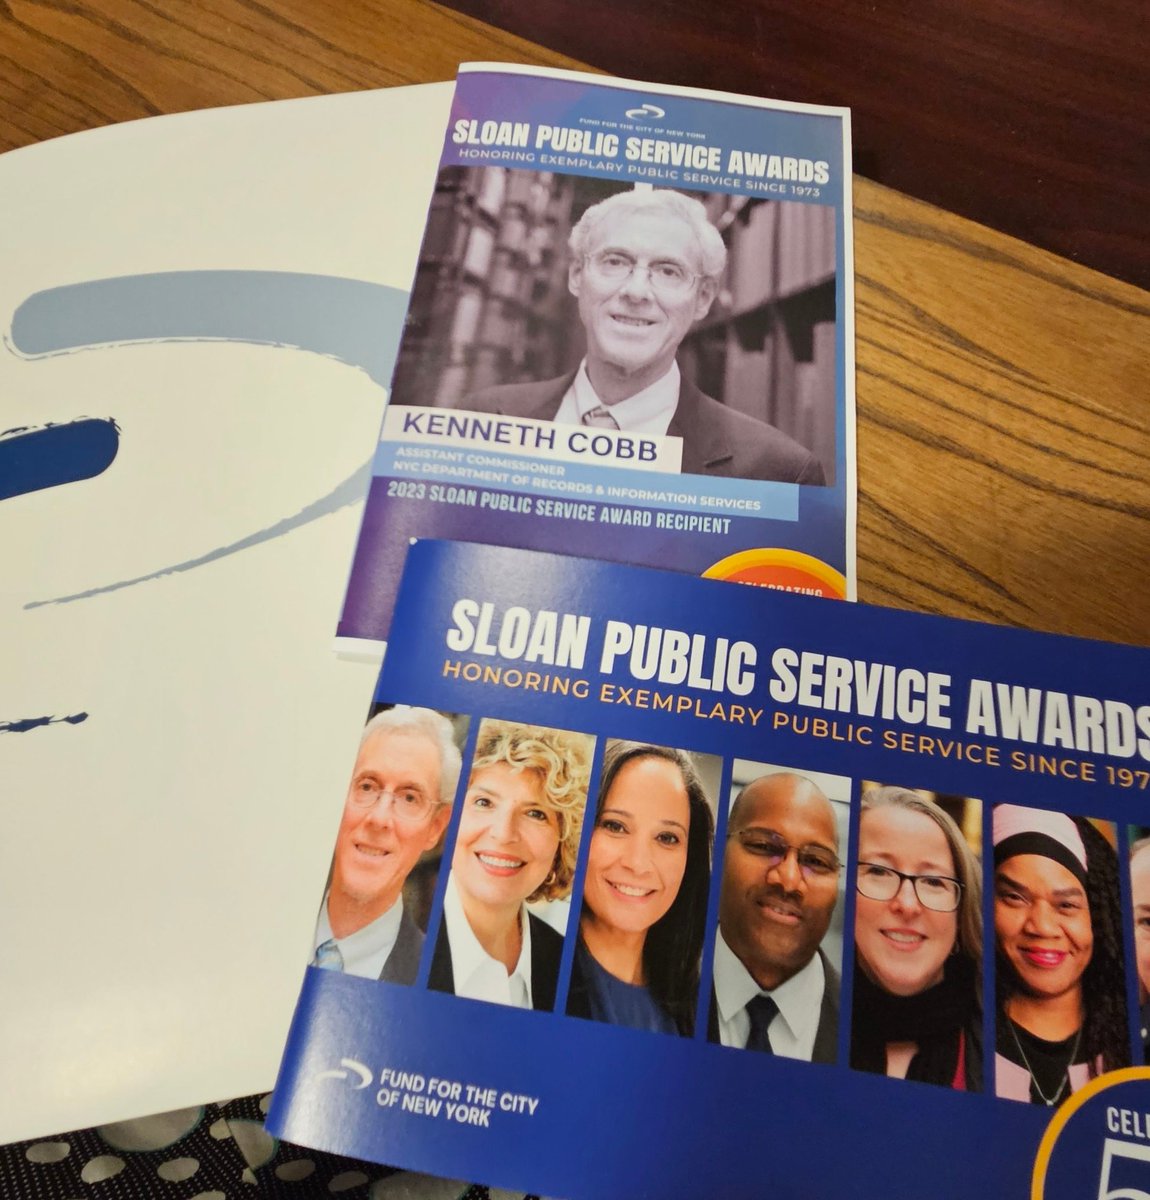 So honored to be part of the selection and presentation of the Sloan Public Service Awards aka the 'Nobel Peace Prize for Public Service' @FCNY_org